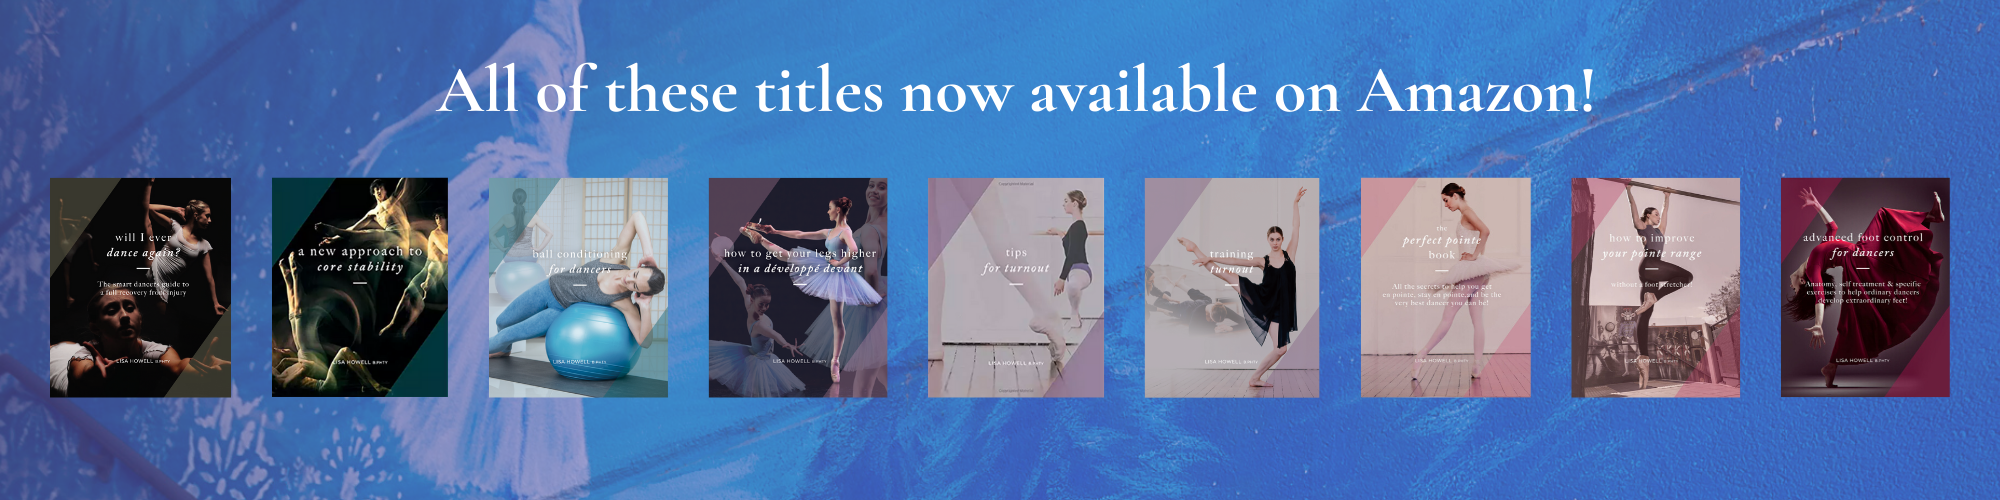 All Titles now Available on Amazon - Product Banner - Lisa Howell - The Ballet Blog